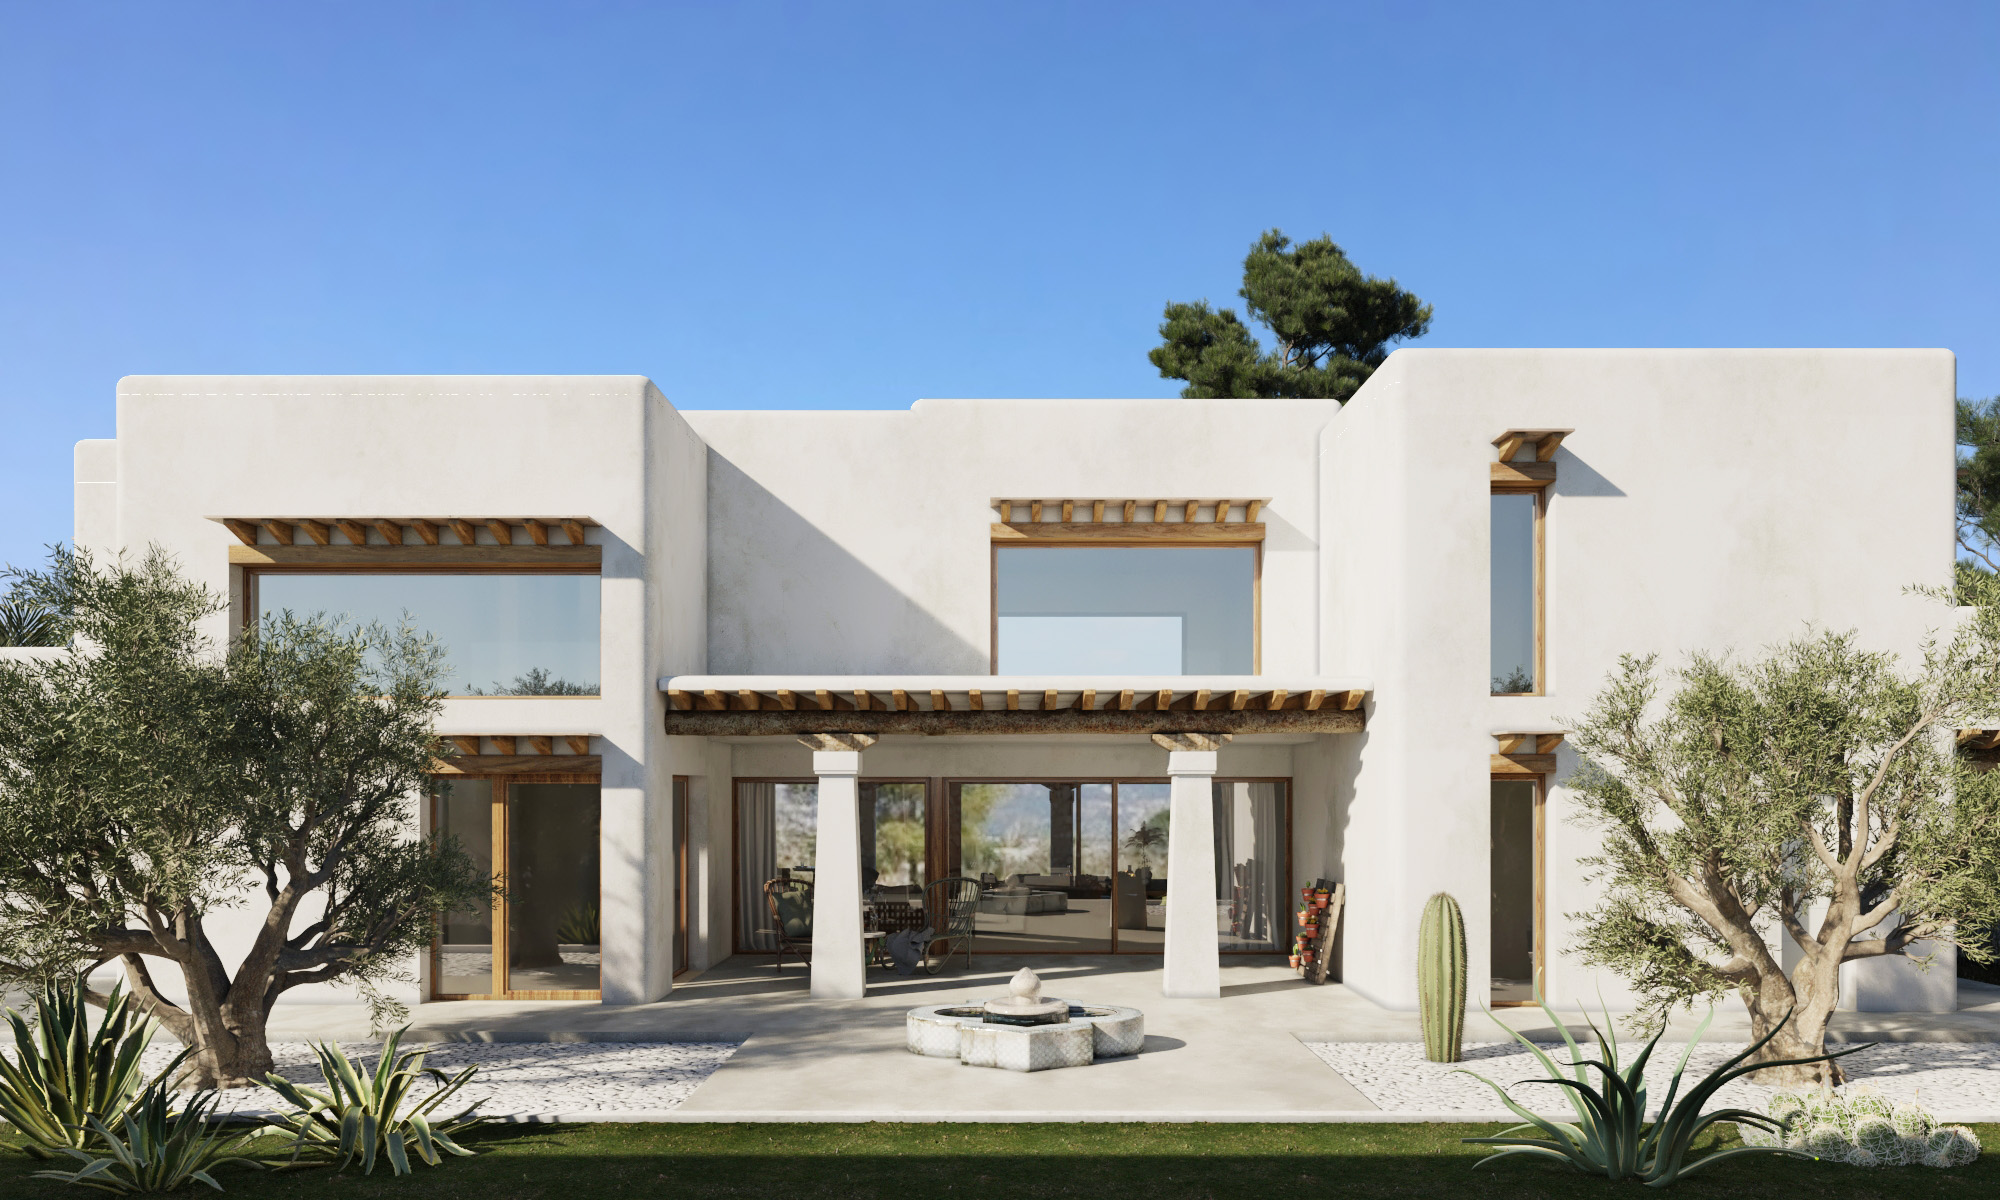 Amazing Project With Sea Views in Puchol, Javea - Casa Do